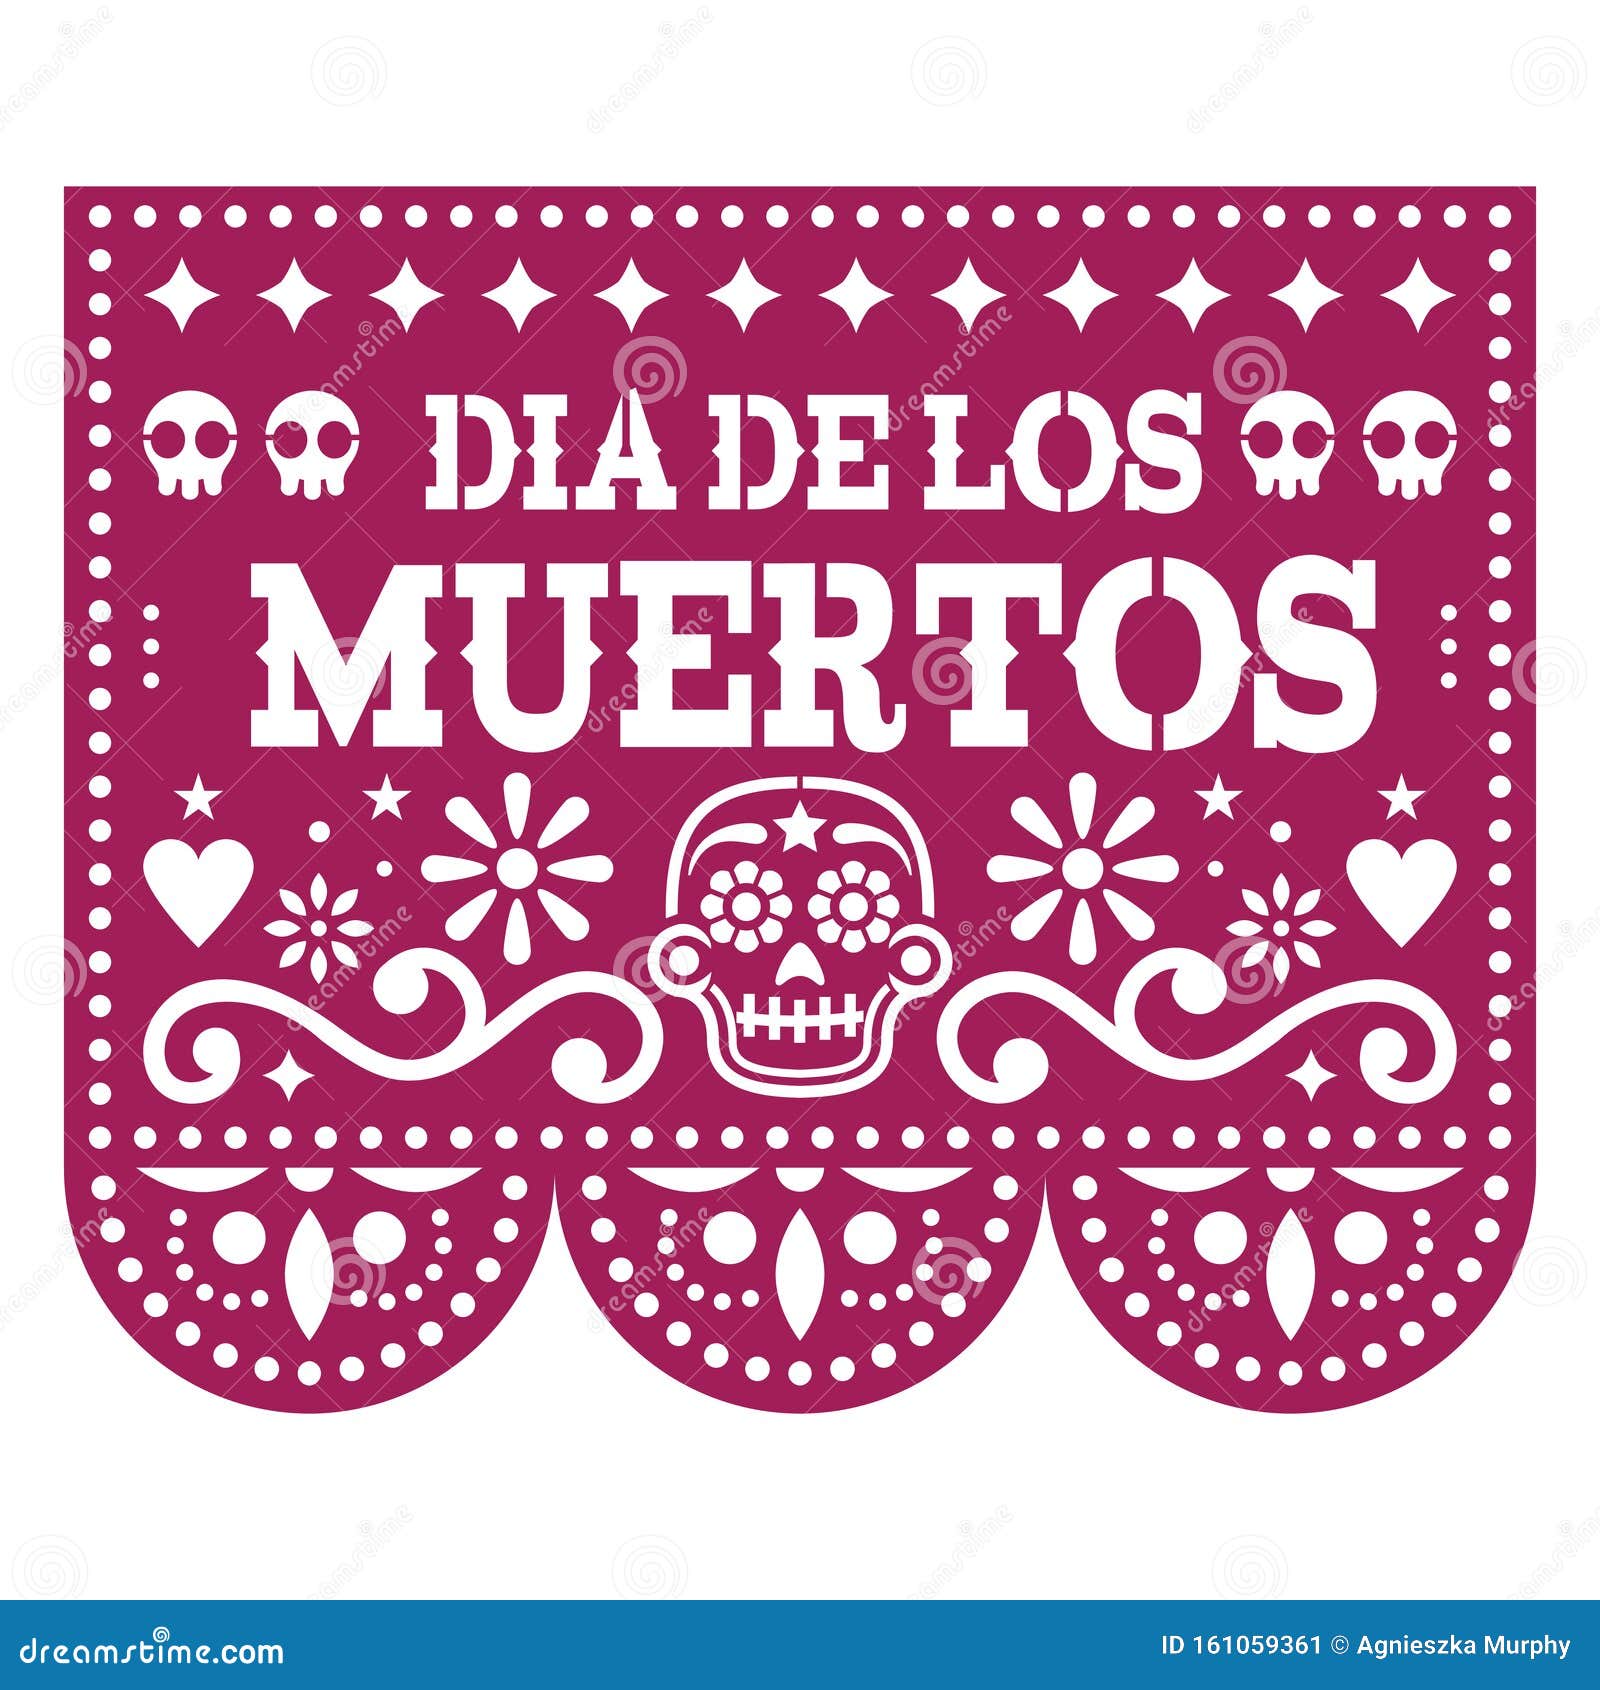 dia de los muertos - day of the dead papel picado  with sugar skulls, mexican paper cut out garland background with flowers